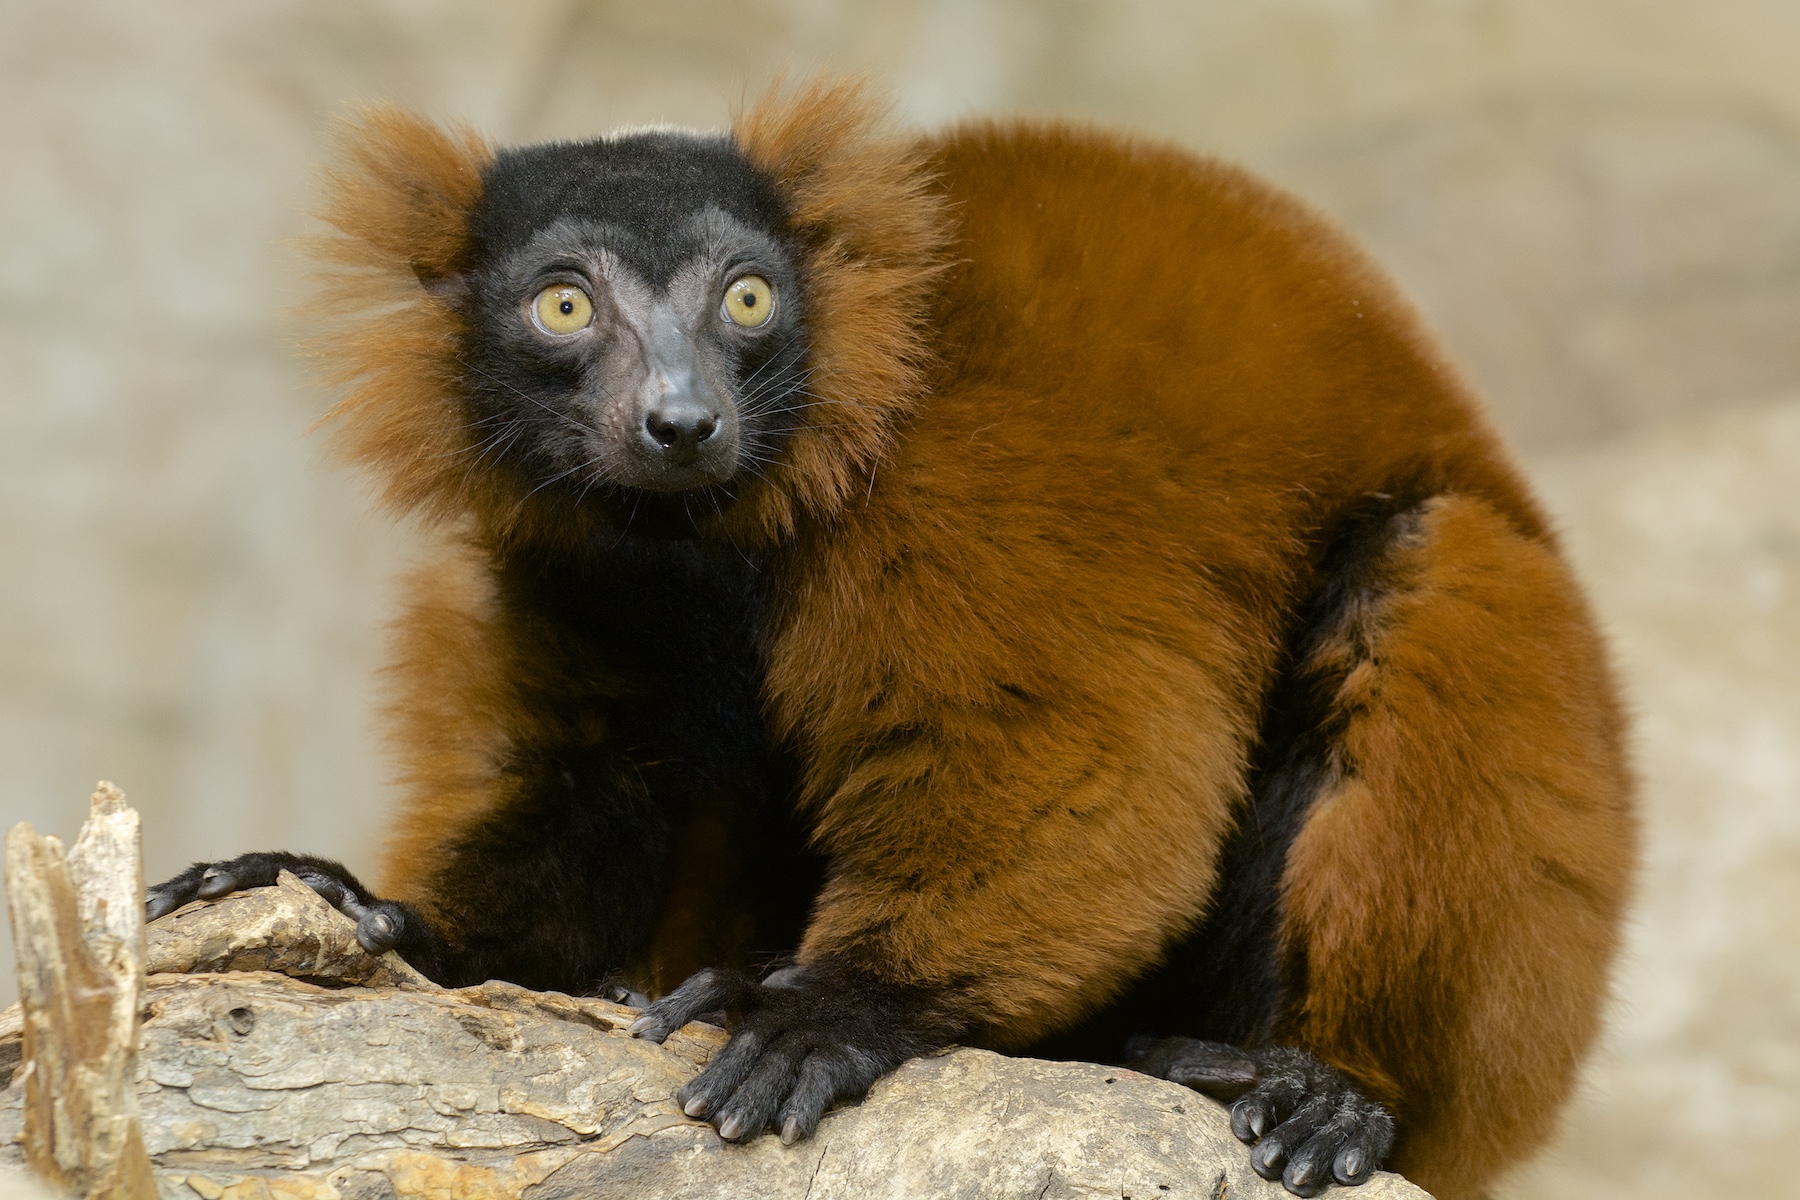 Smithsonian National Zoo - Lemur Conservation Network